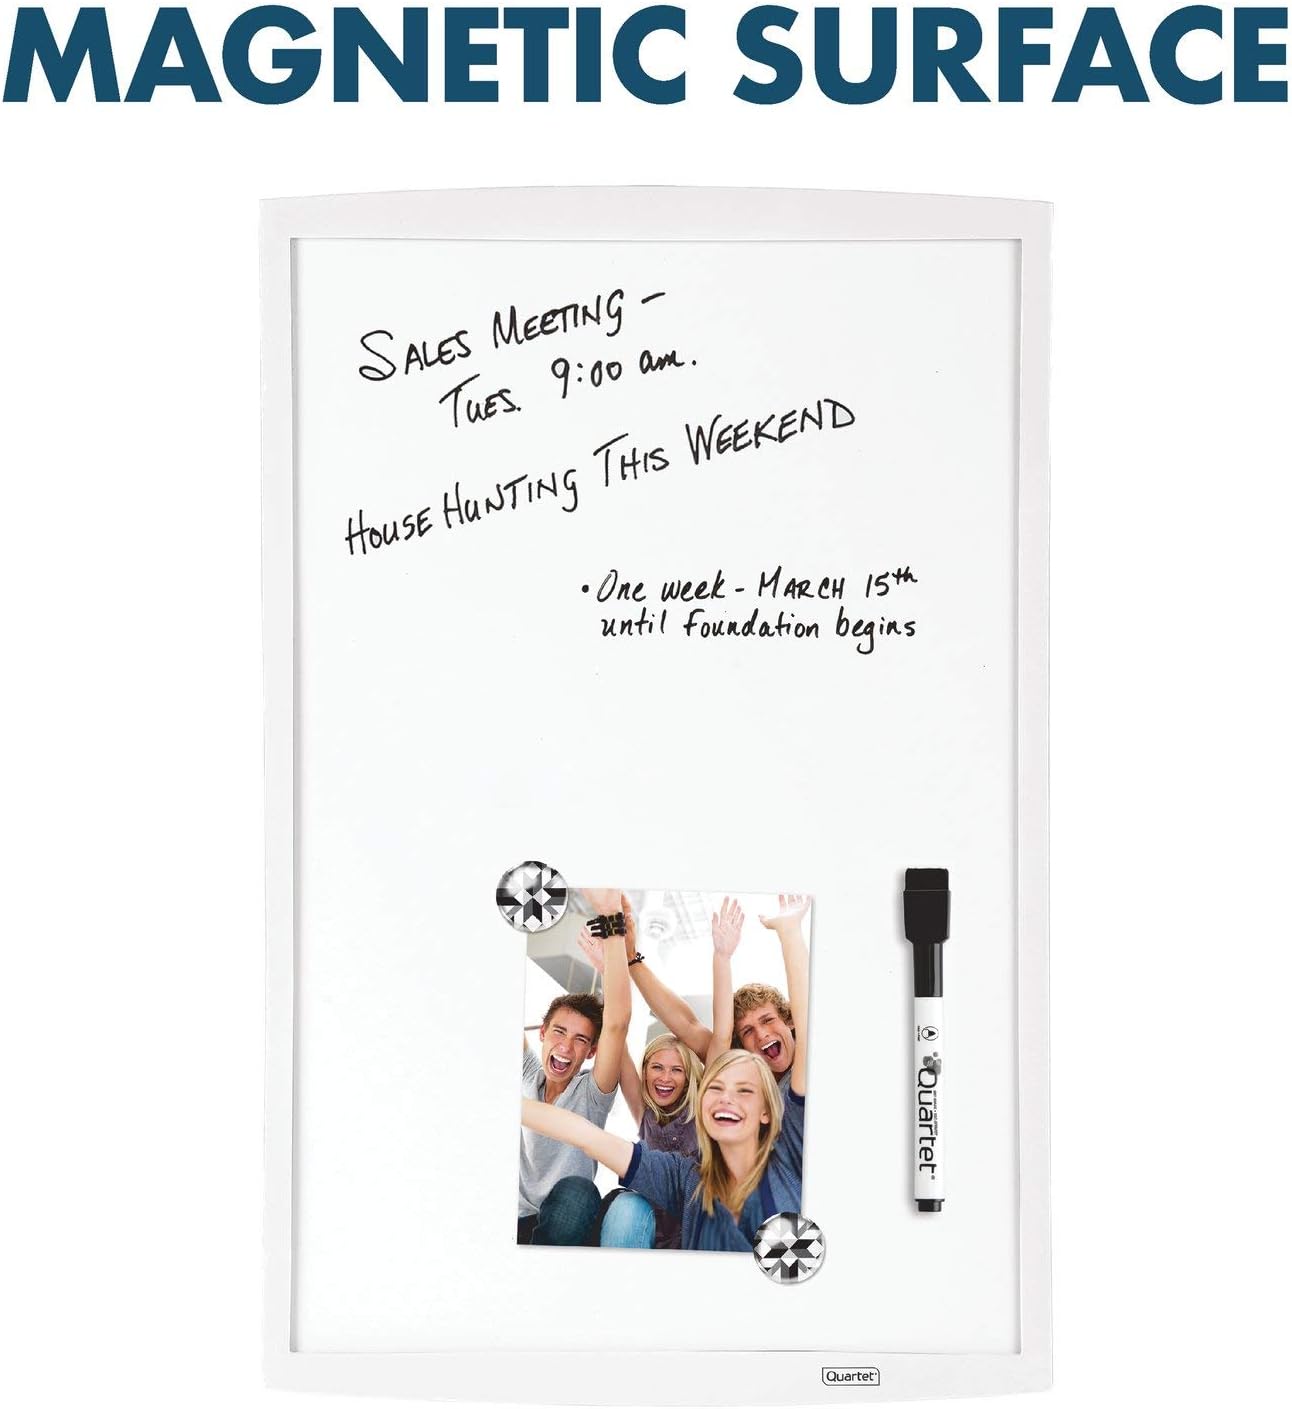 Quartet Magnetic Whiteboard, 11" x 14", Small White Board, Dry Erase Board for Kids, Home School Supplies or Home Office Decor, White Plastic Frame, Includes 1 Dry Erase Marker & 2 Magnets (63536)